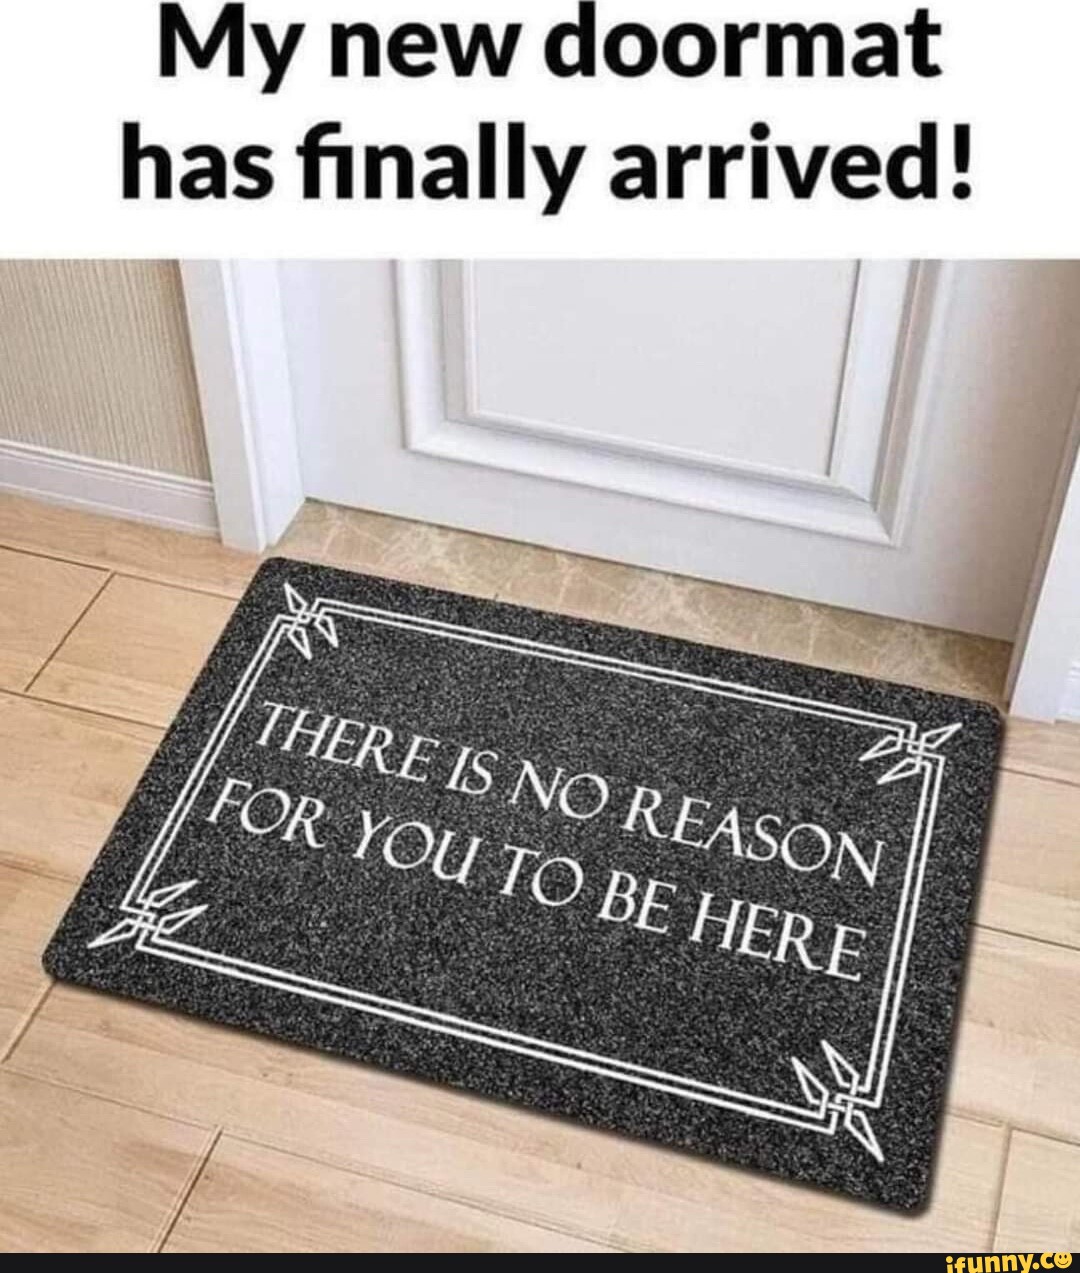 My new doormat has finally arrived! - iFunny Brazil